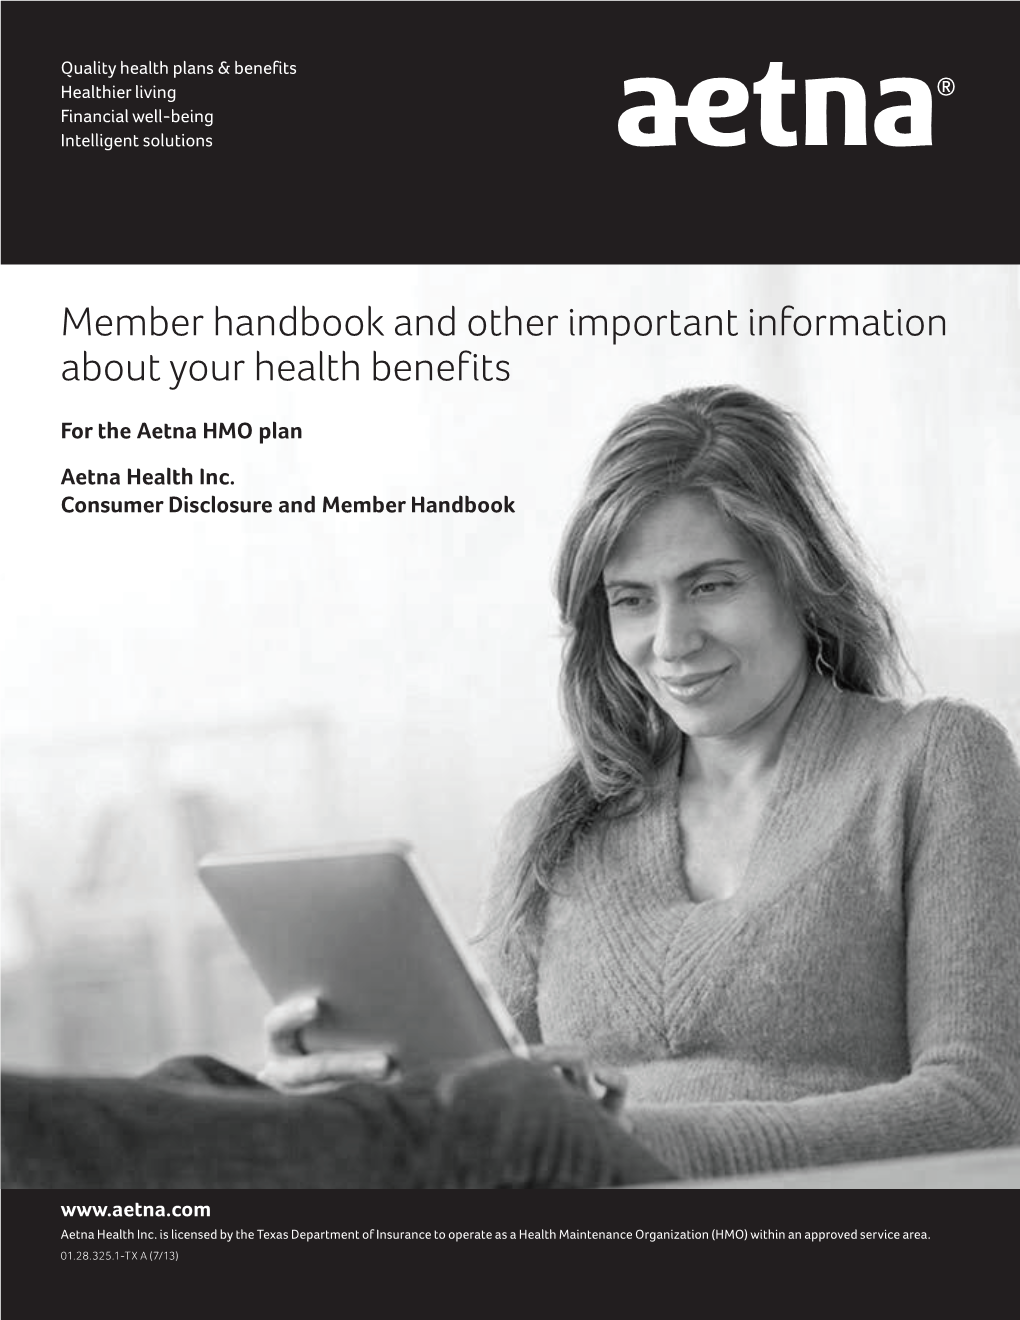 Member Handbook and Other Important Information About Your Health Benefits